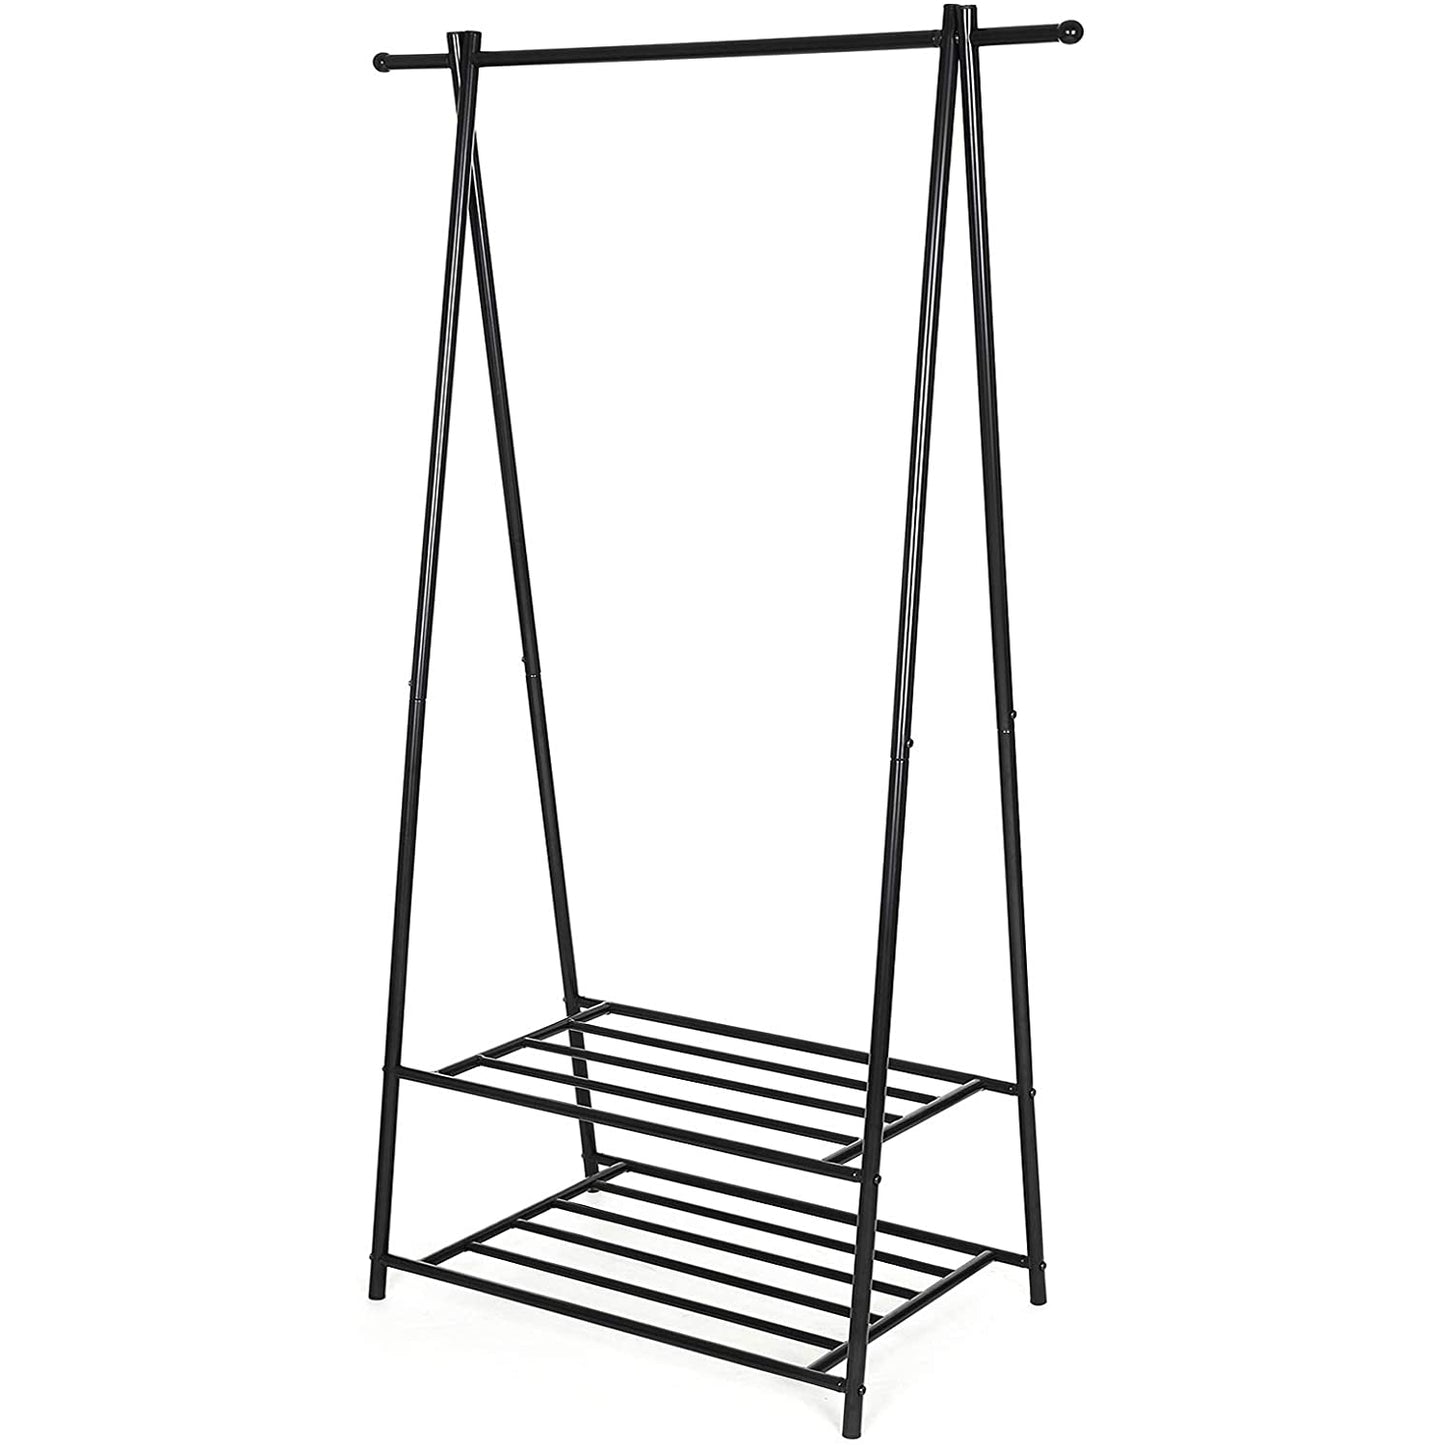 Nancy's Clothing Stand - Clothes Rack With 2 Tier Shoe Rack - For Clothes and Shoes